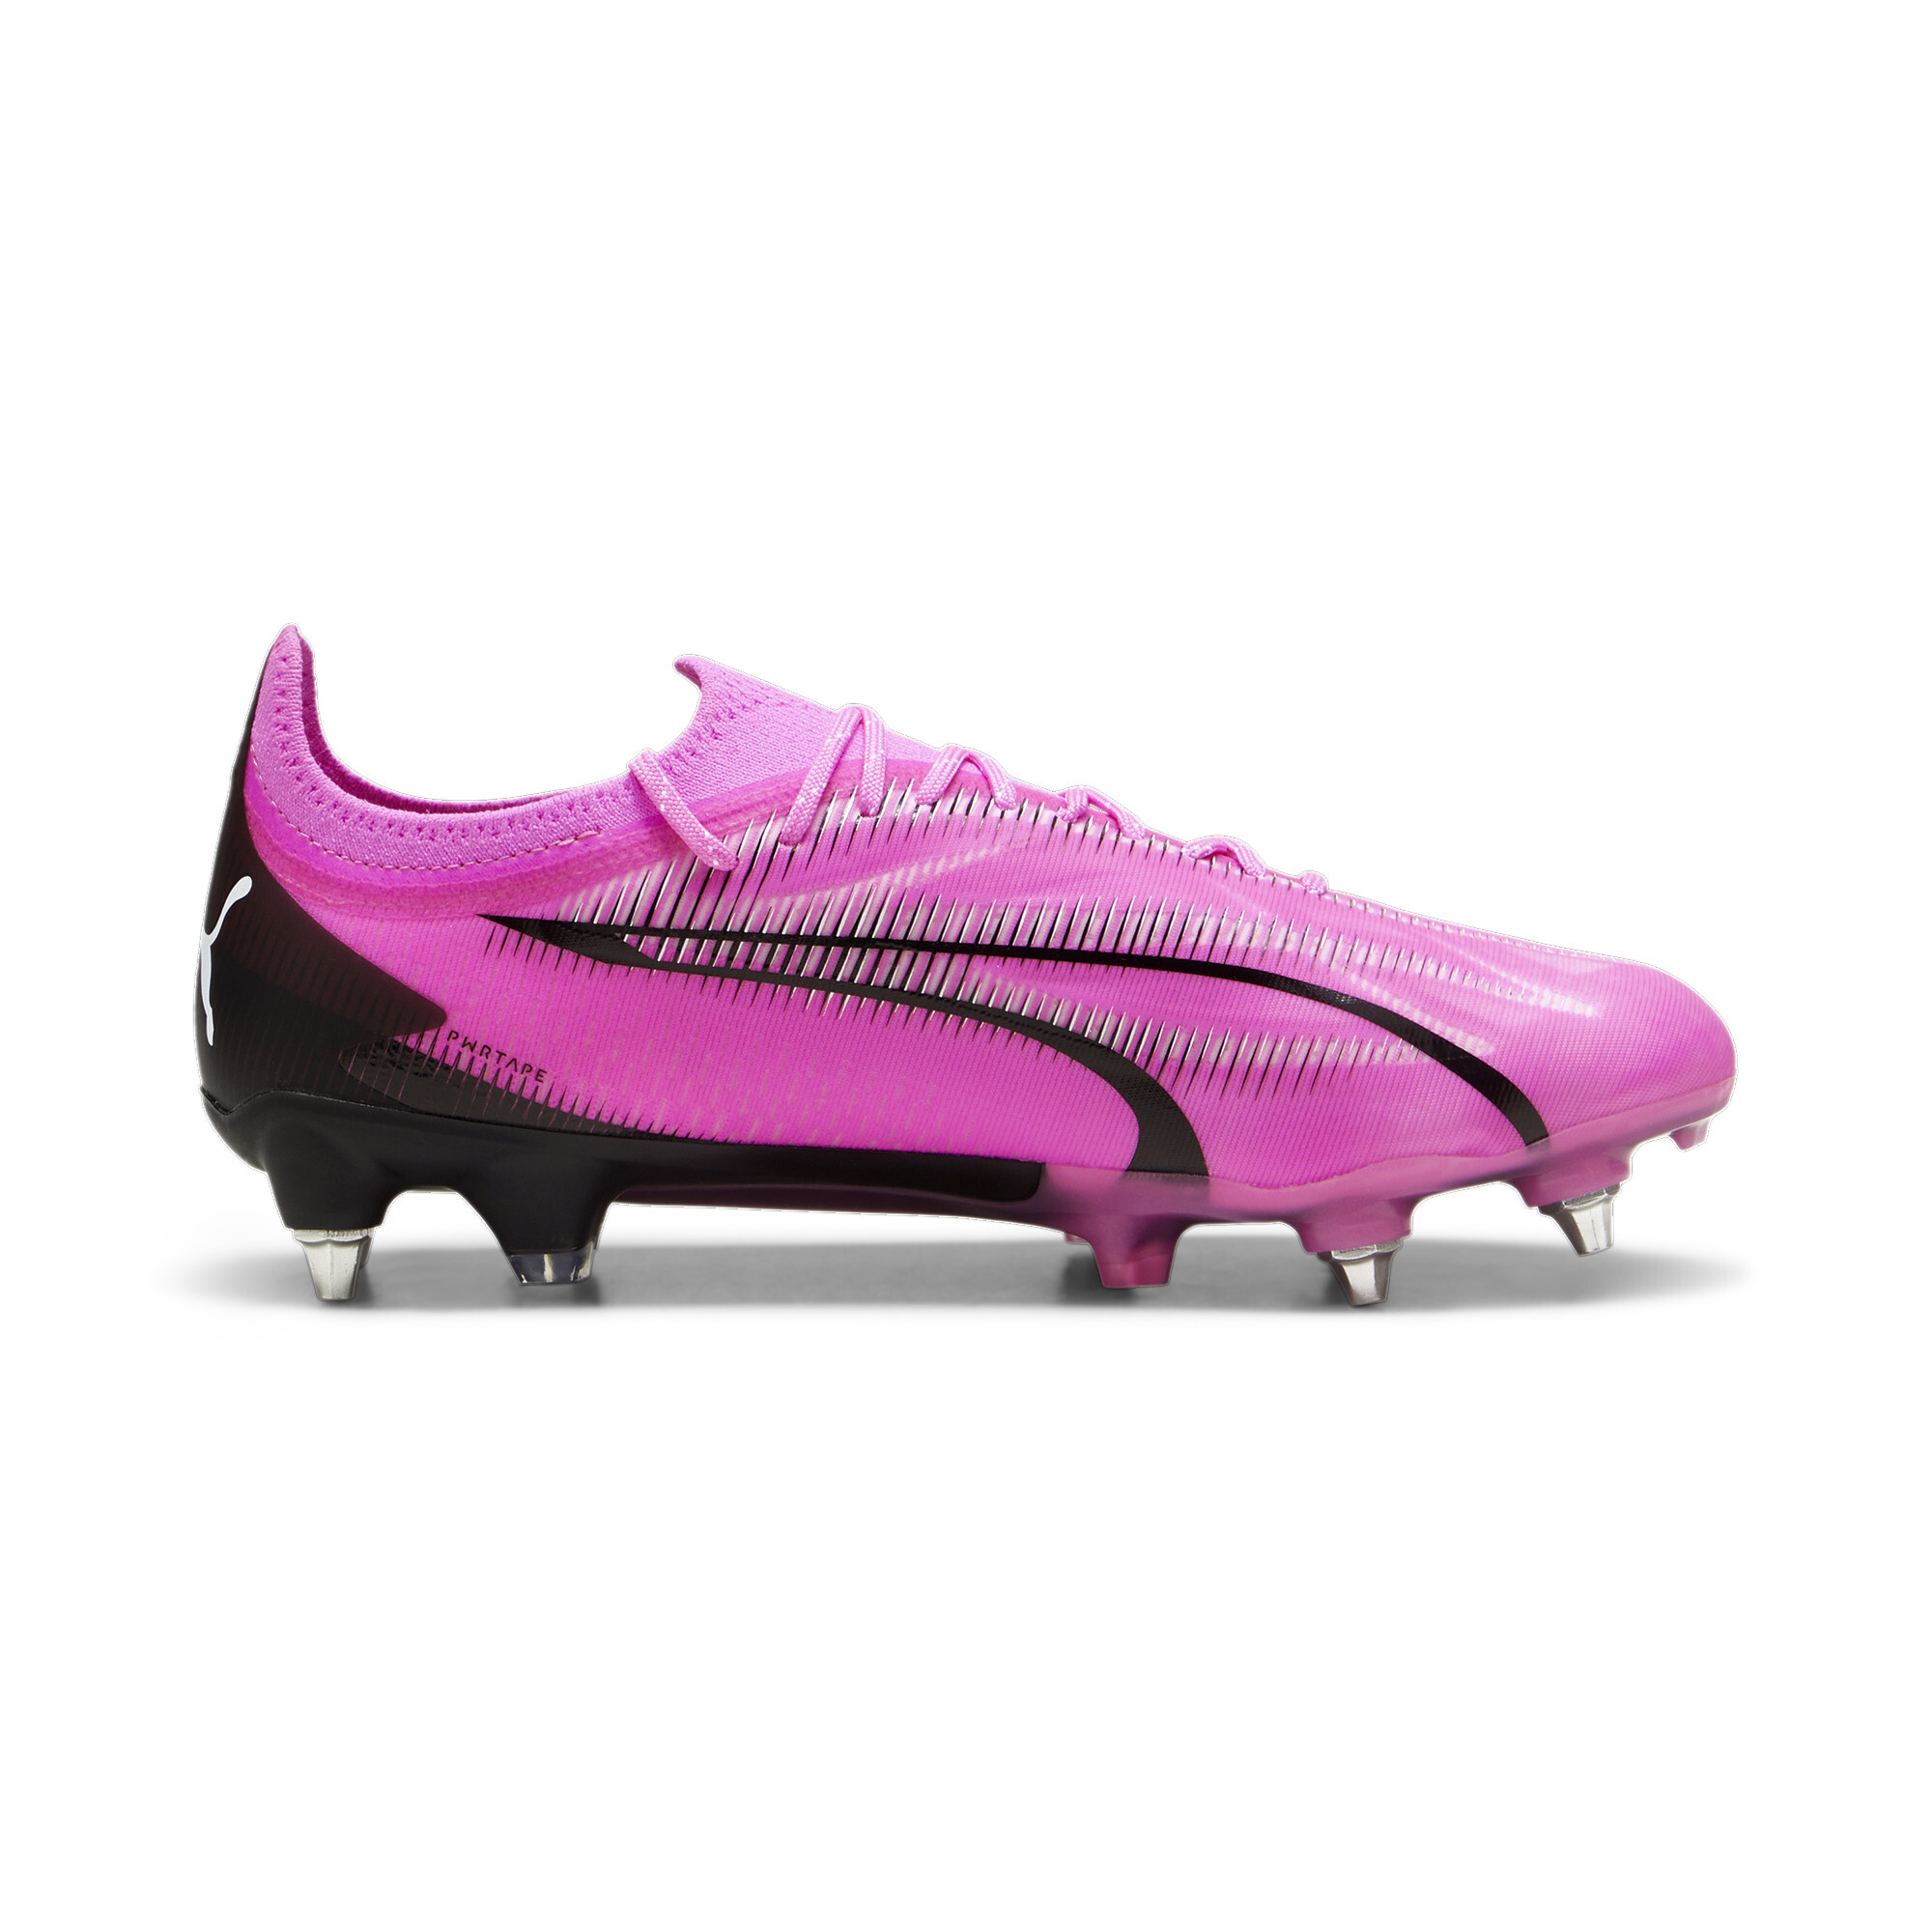 Puma ULTRA ULTIMATE Mx SG Football Boots, Pink, Size 46, Shoes